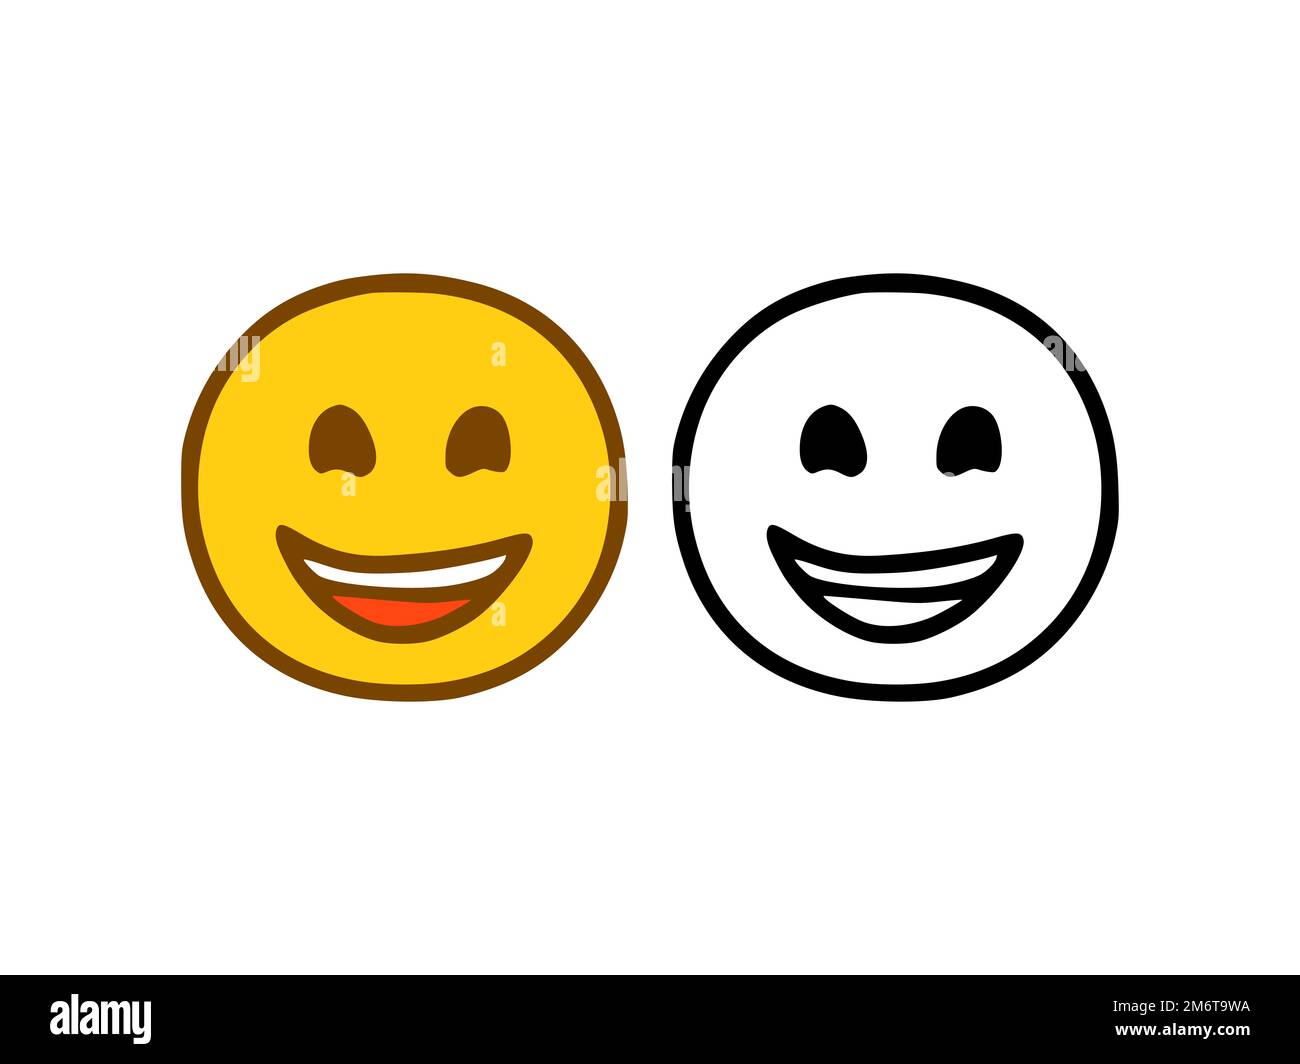 Happy face emoticon in doodle style isolated on white background Stock Photo